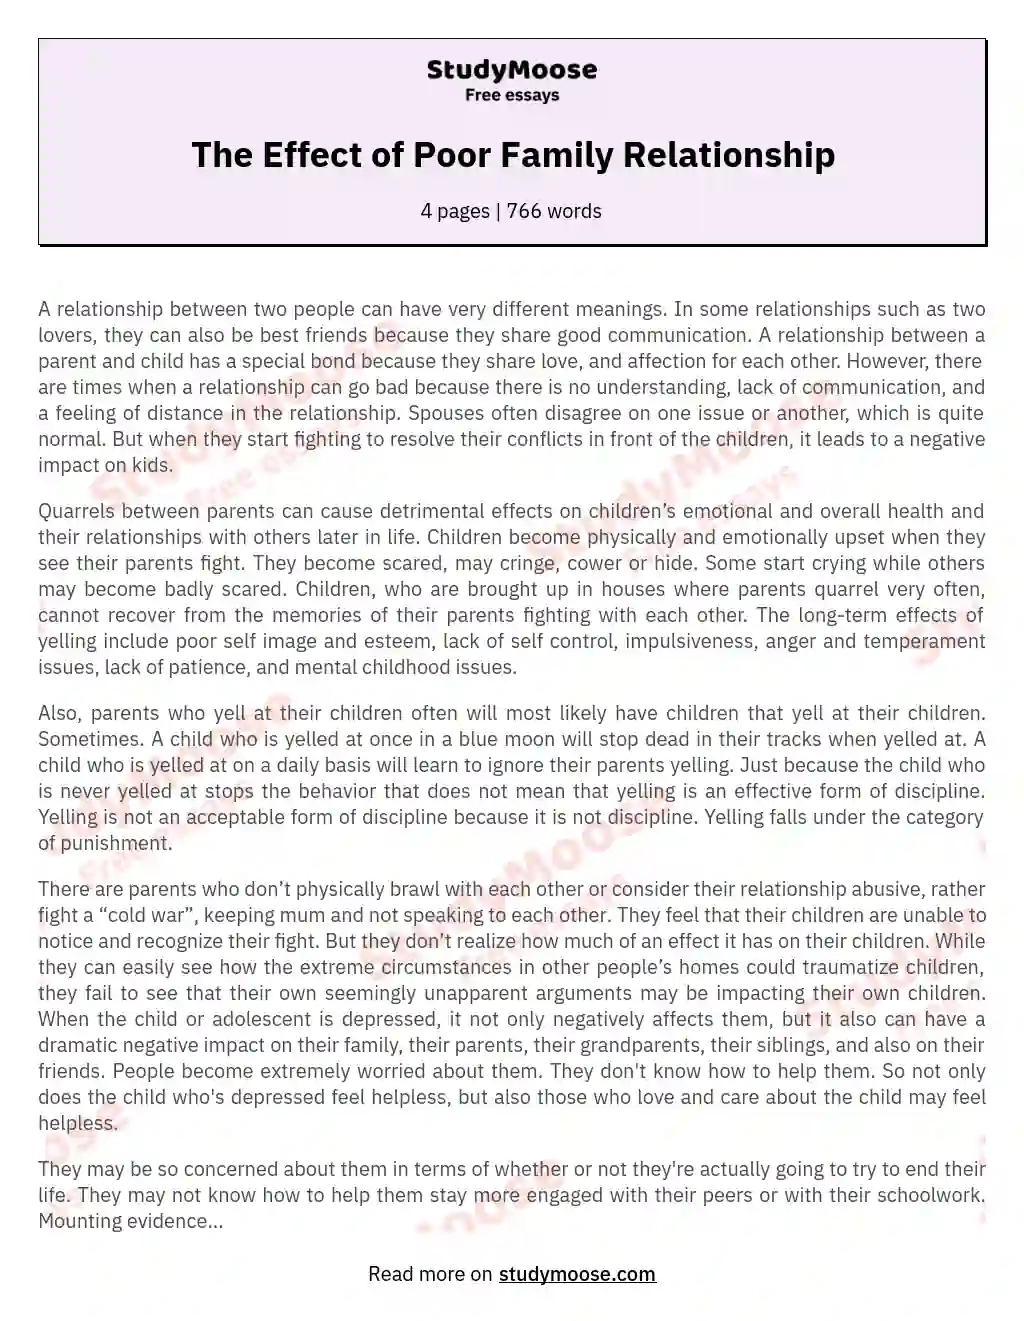 The Effect of Poor Family Relationship